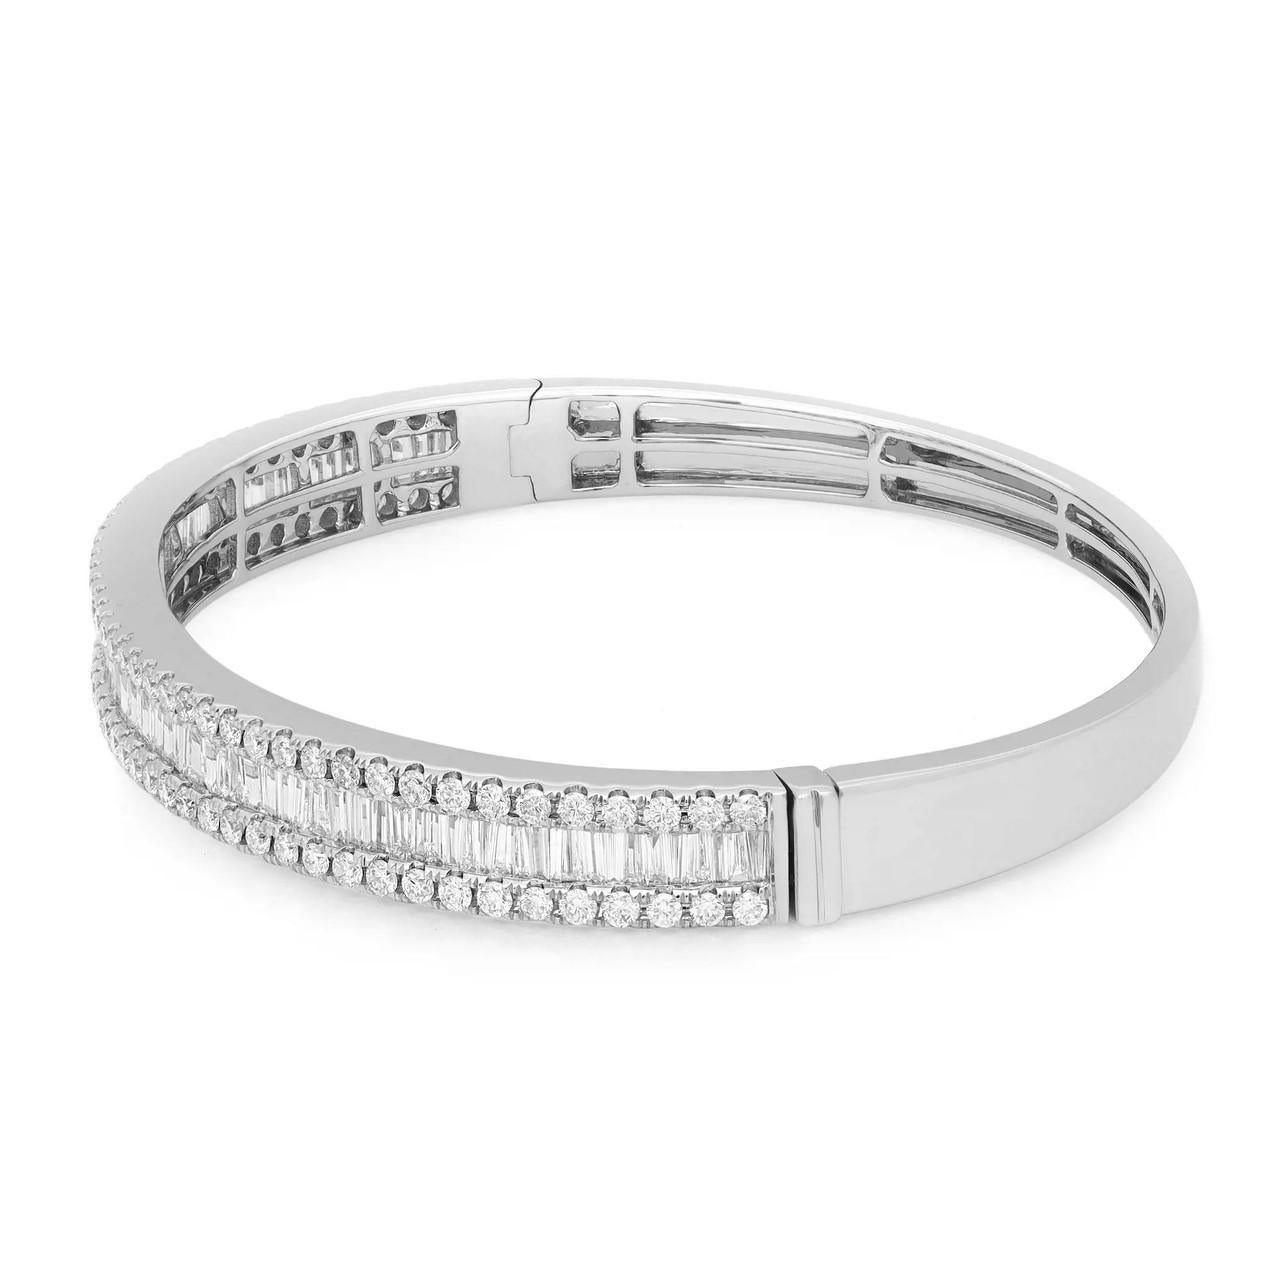 Adorn your wrist with this exquisite bangle bracelet that exudes timeless beauty. Crafted from gleaming 18K white gold, it features a dazzling row of diamonds. The center row showcases channel-set baguette-cut diamonds, while round-cut diamonds